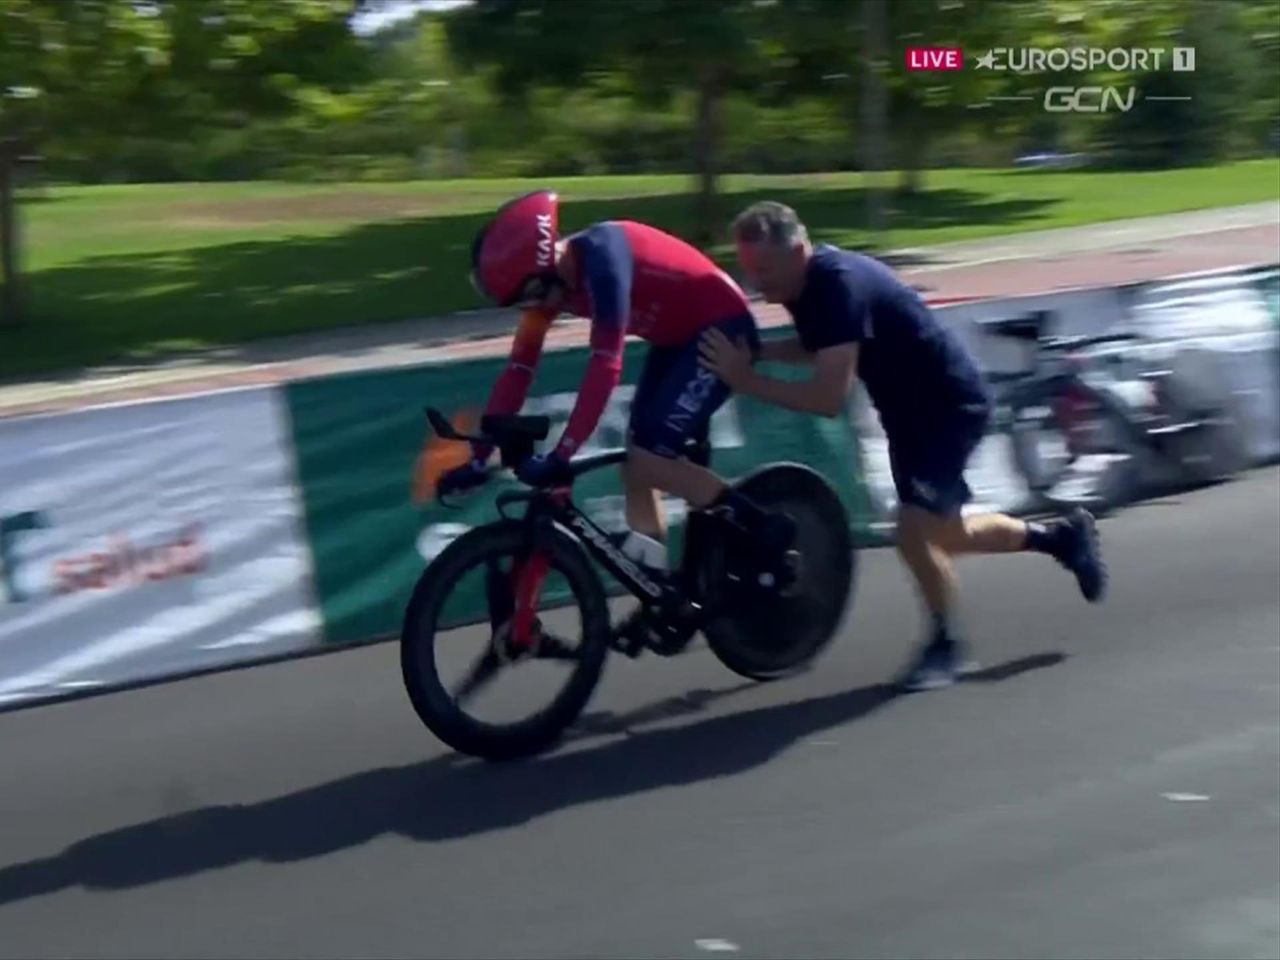 Vuelta a Espana 2023 Geraint Thomas bad luck coming in waves after latest mishap - Adam Blythe - Cycling video